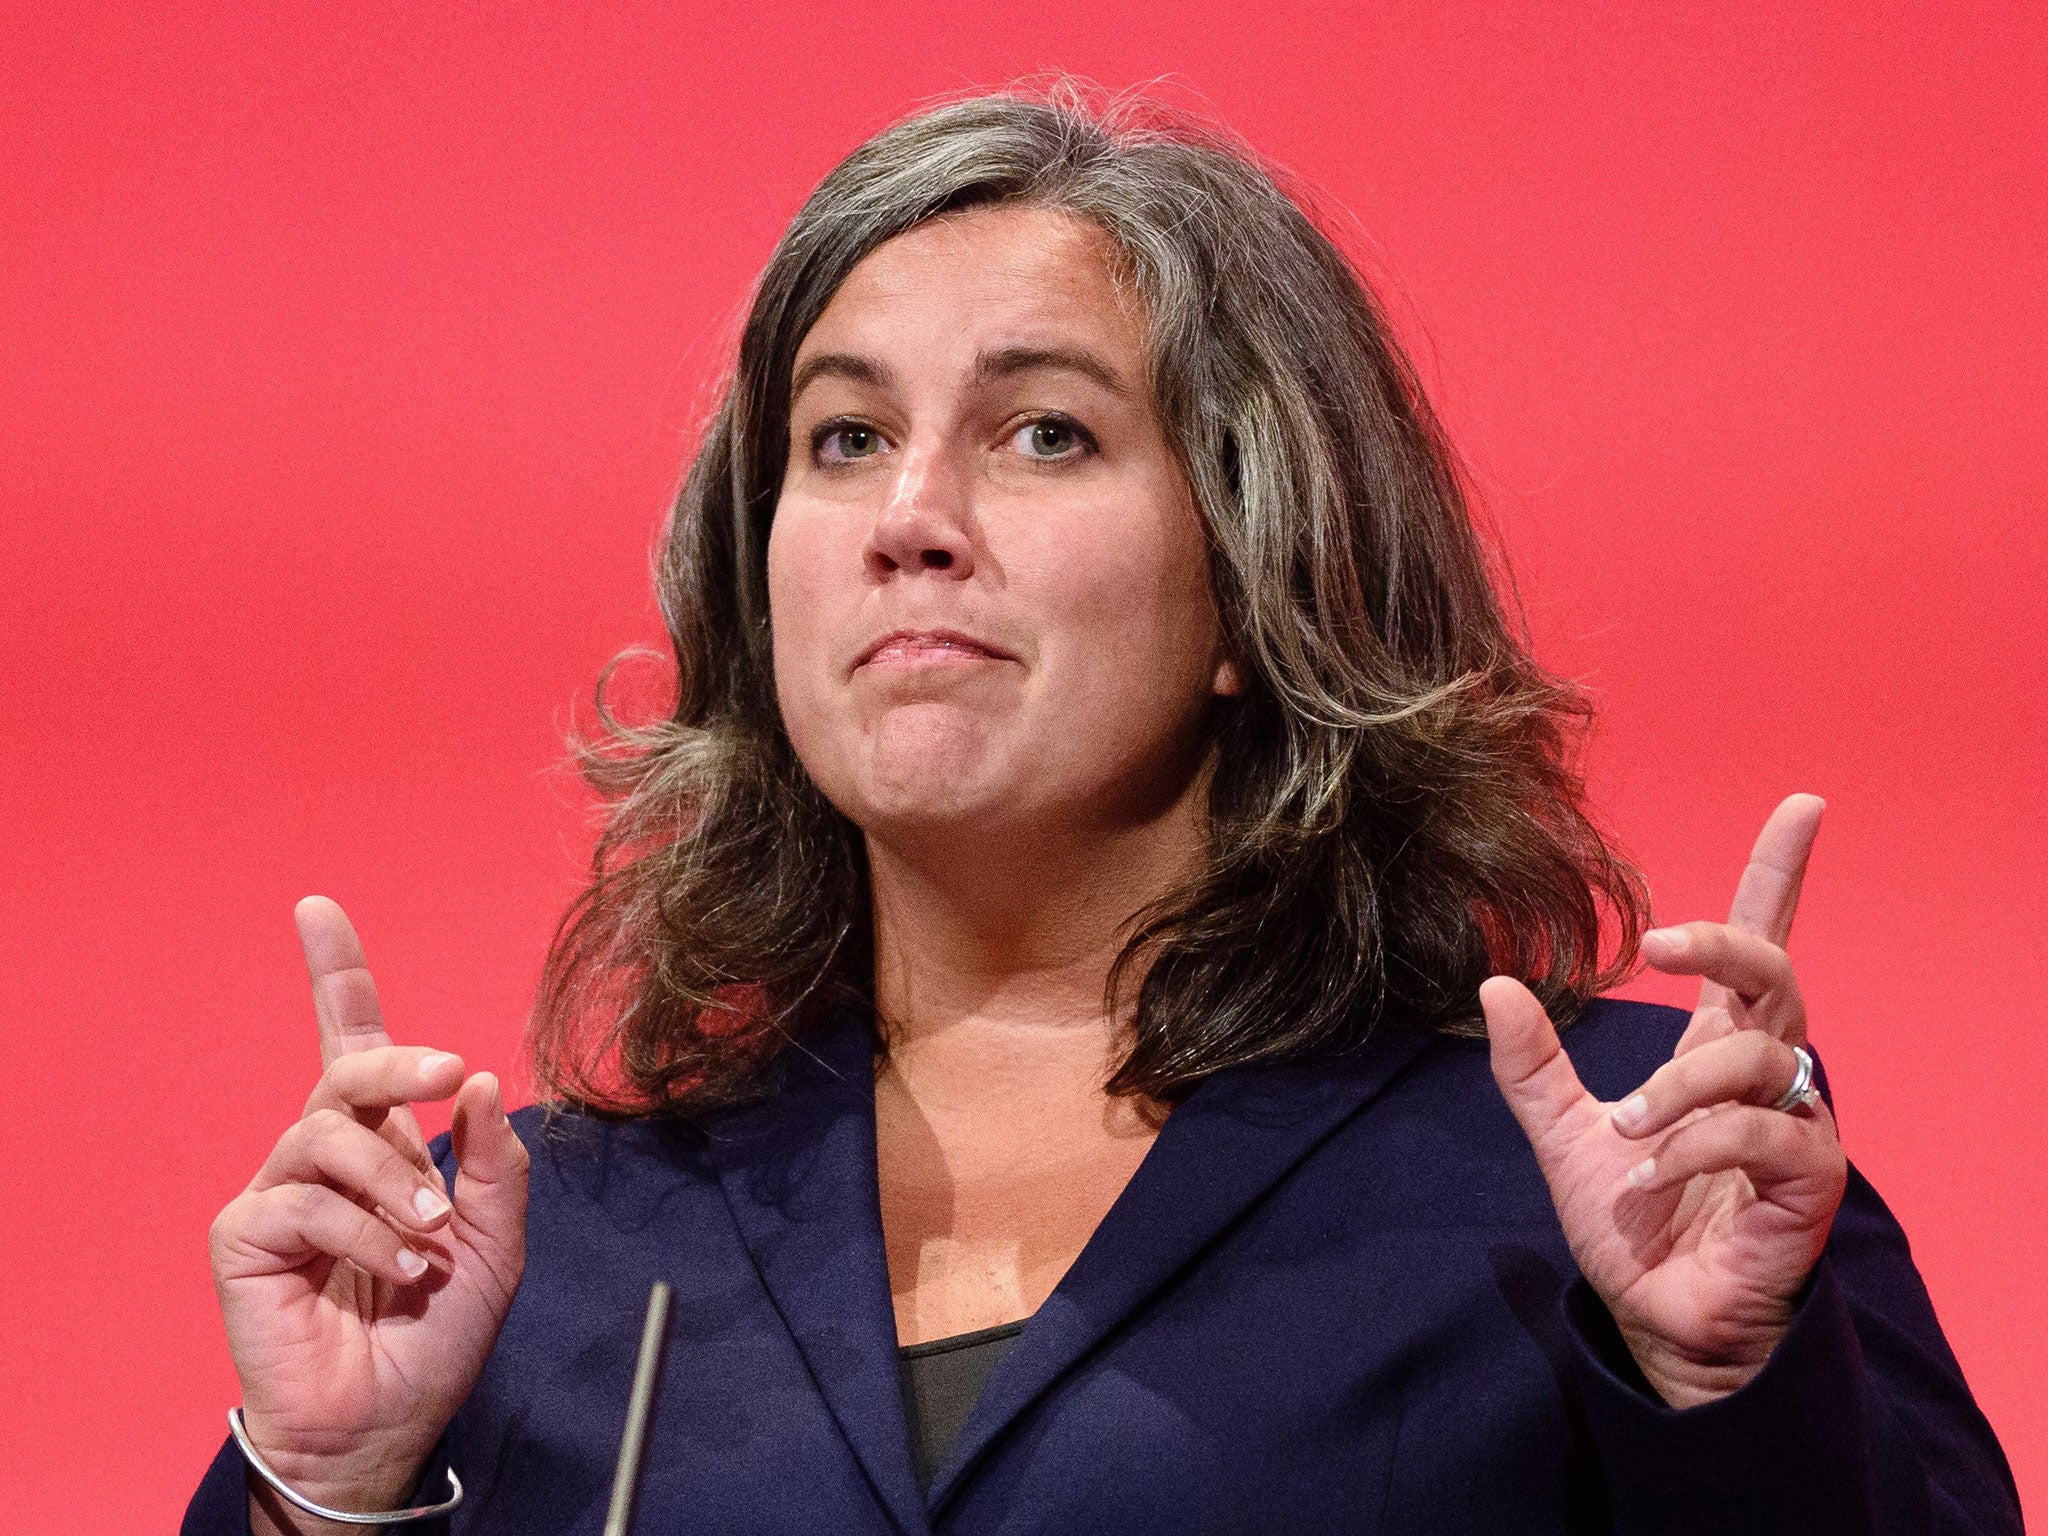 Shadow Health Secretary Heidi Alexander has called for ministers to investigate GE Healthcare’s tax practices